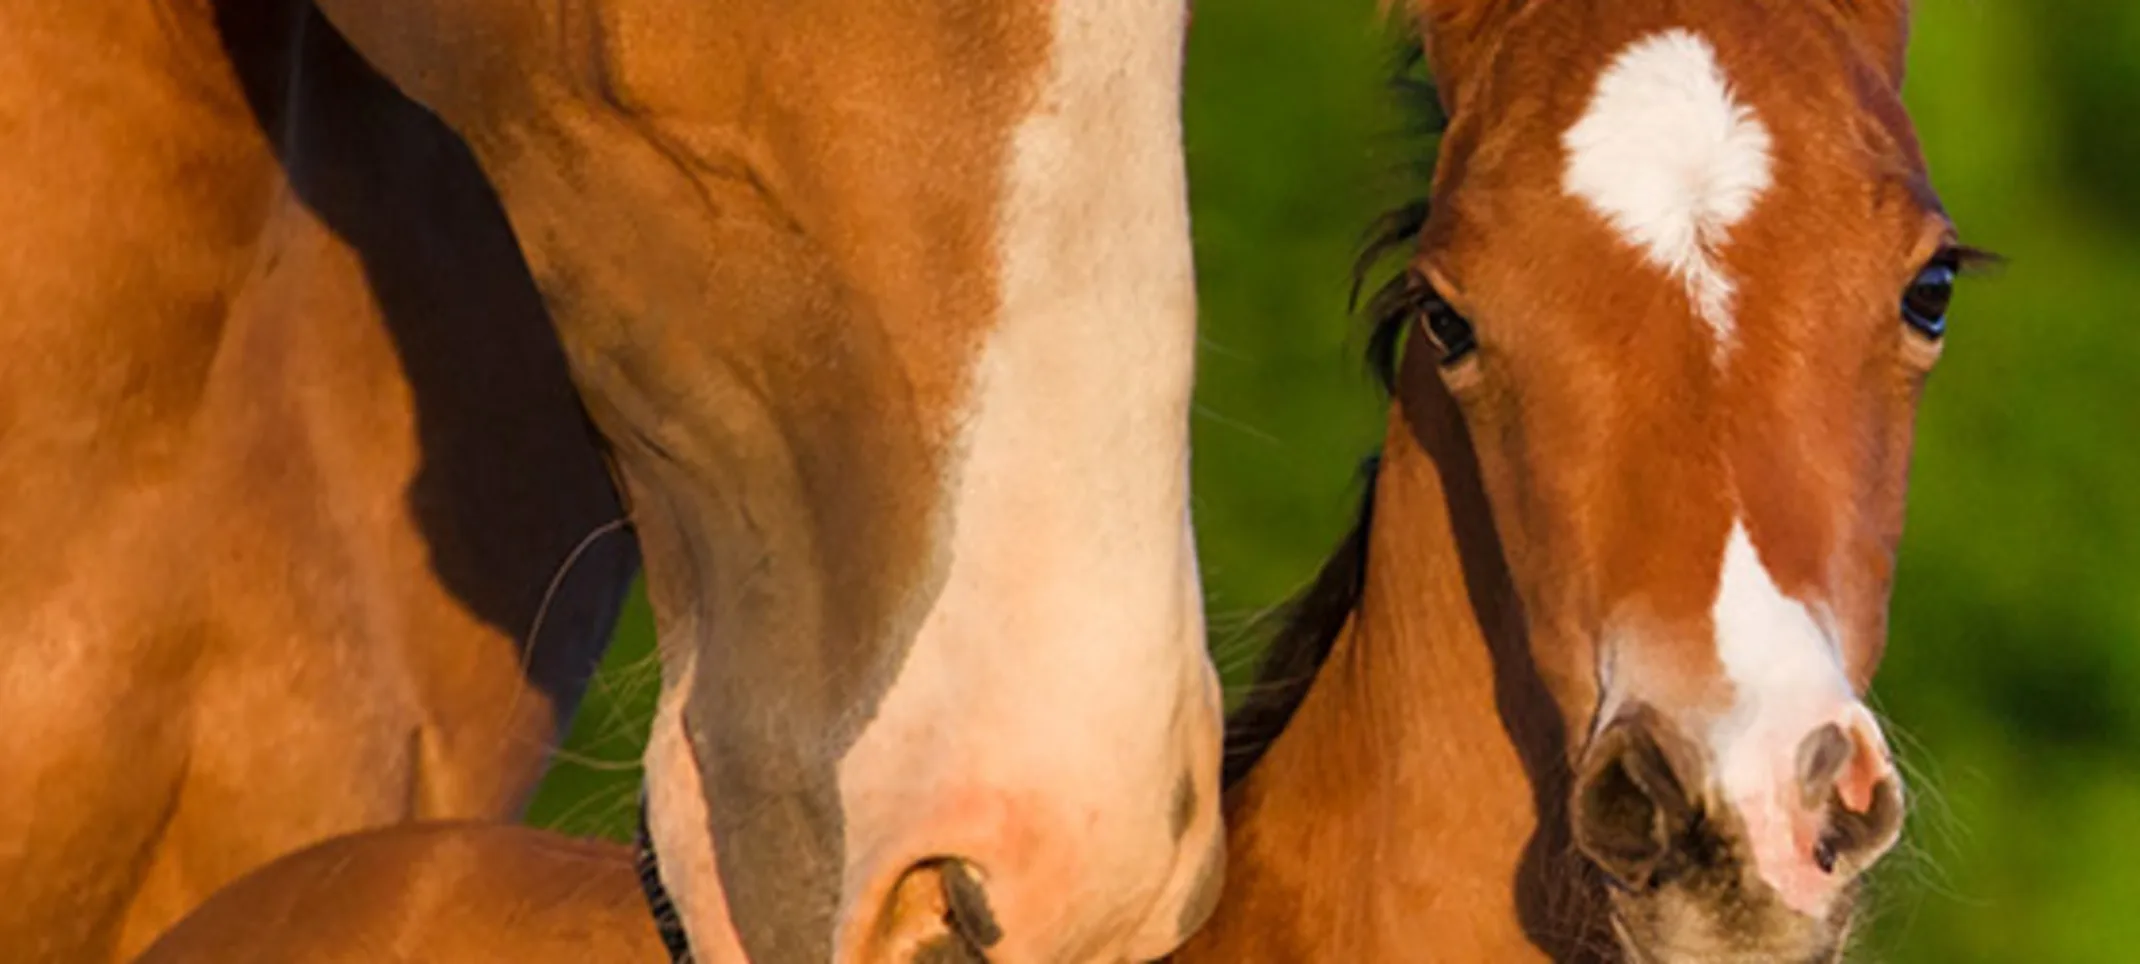 Equine Reproductive Services - Mare and Foal